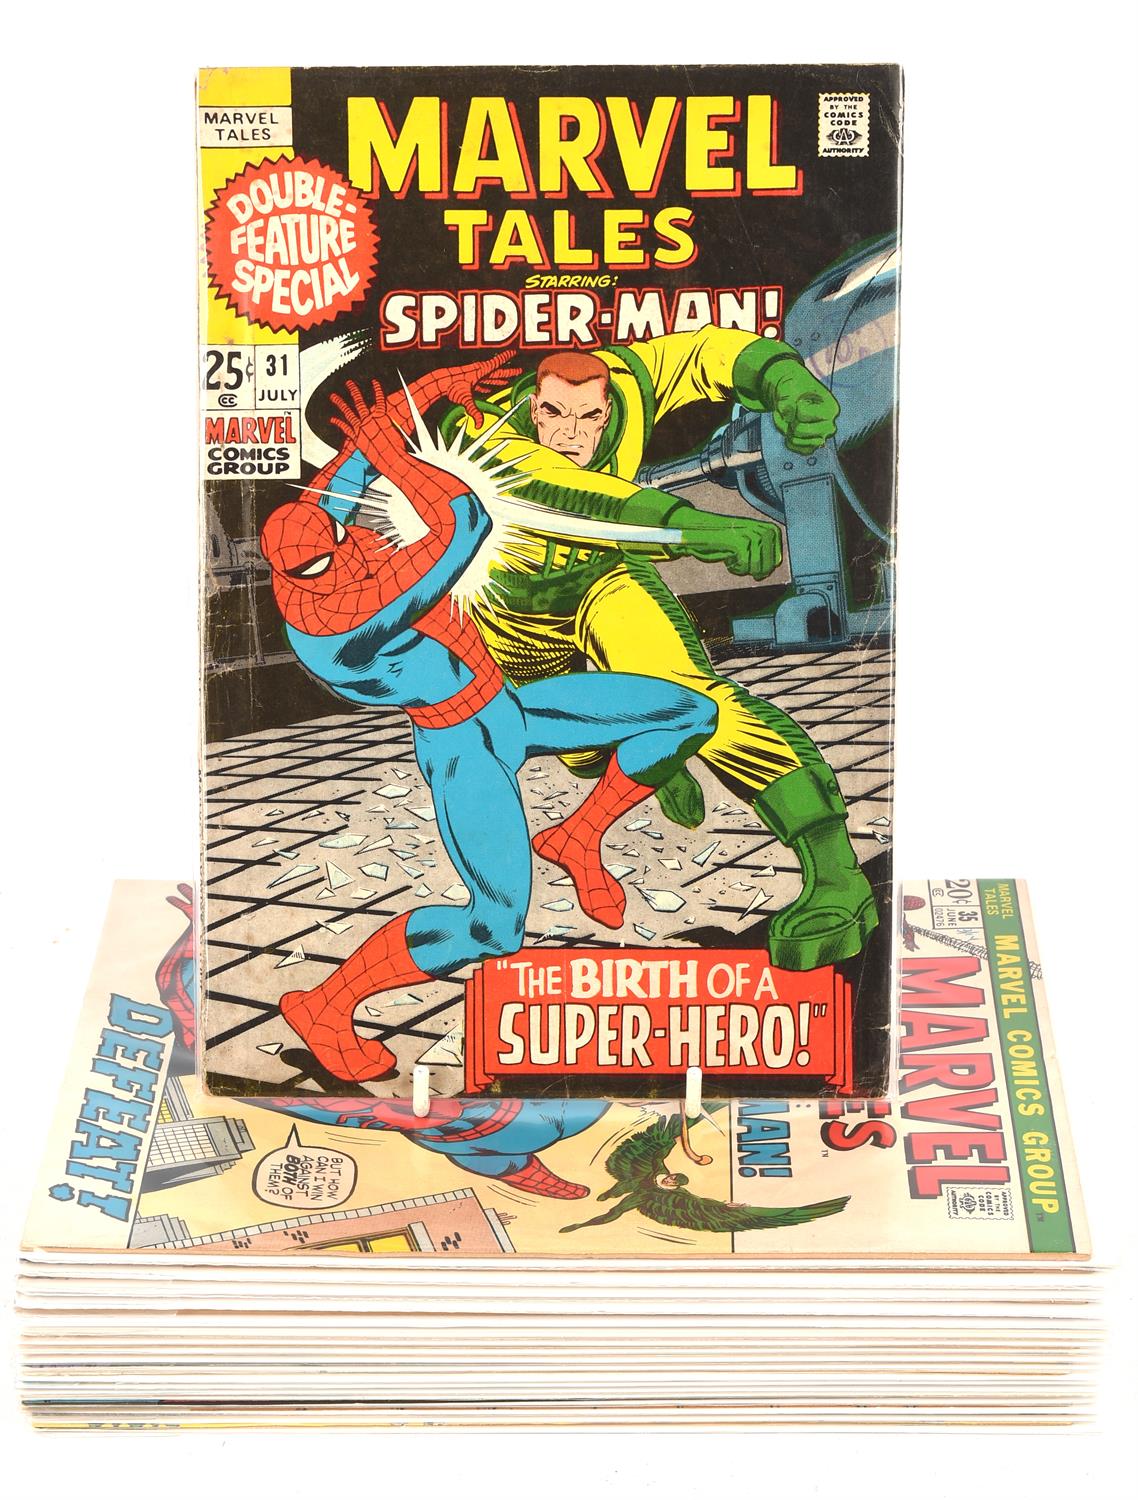 Marvel comics: A Marvel Tales starring the Amazing Spider-Man group of nineteen (19) Silver and